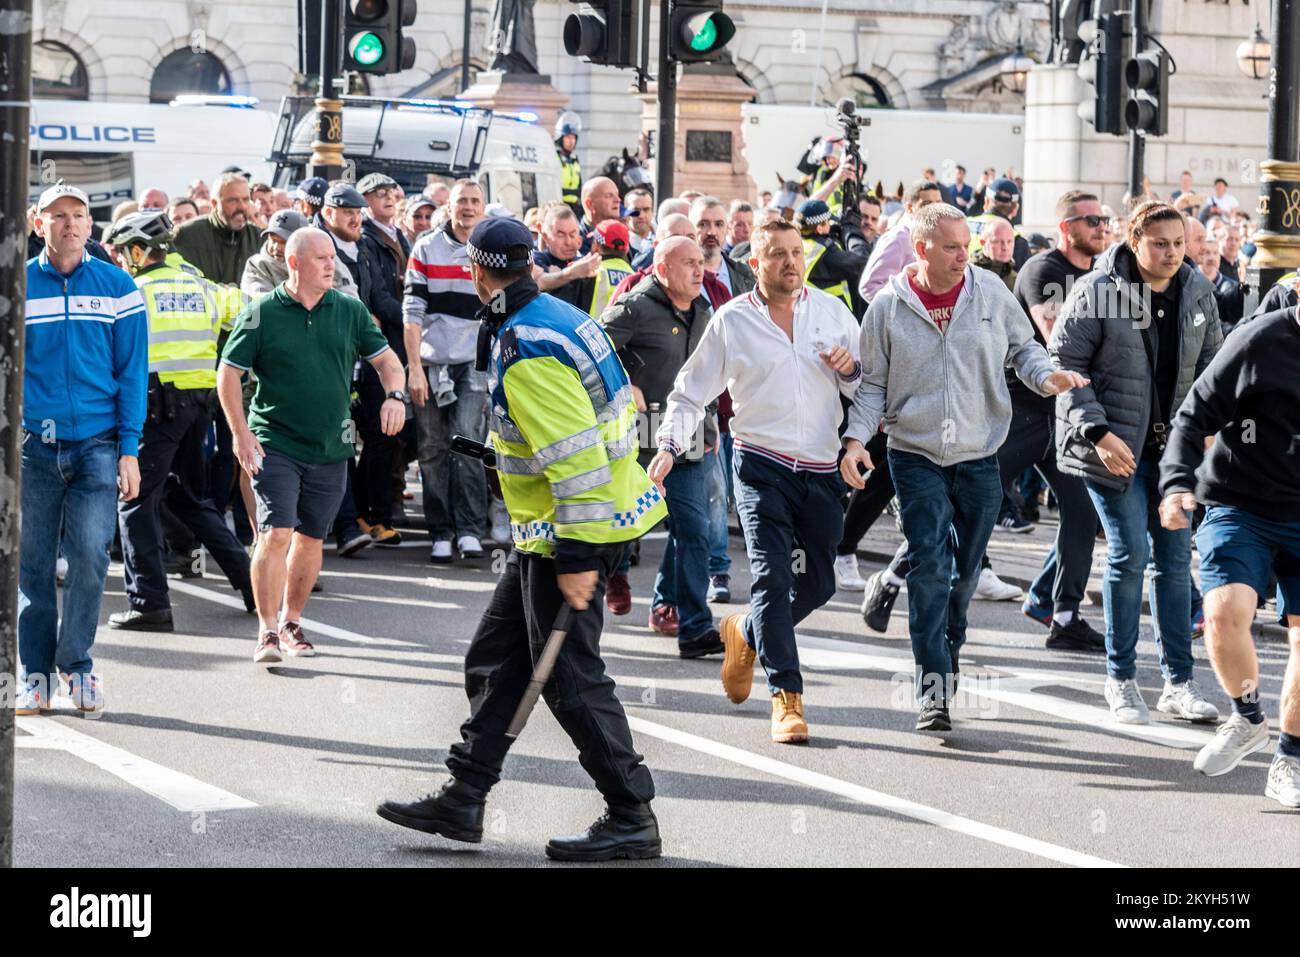 Democratic Football Lads Alliance, DFLA, march in London, UK, in a protest demonstration. Breaking through police cordon. Lone police officer Stock Photo